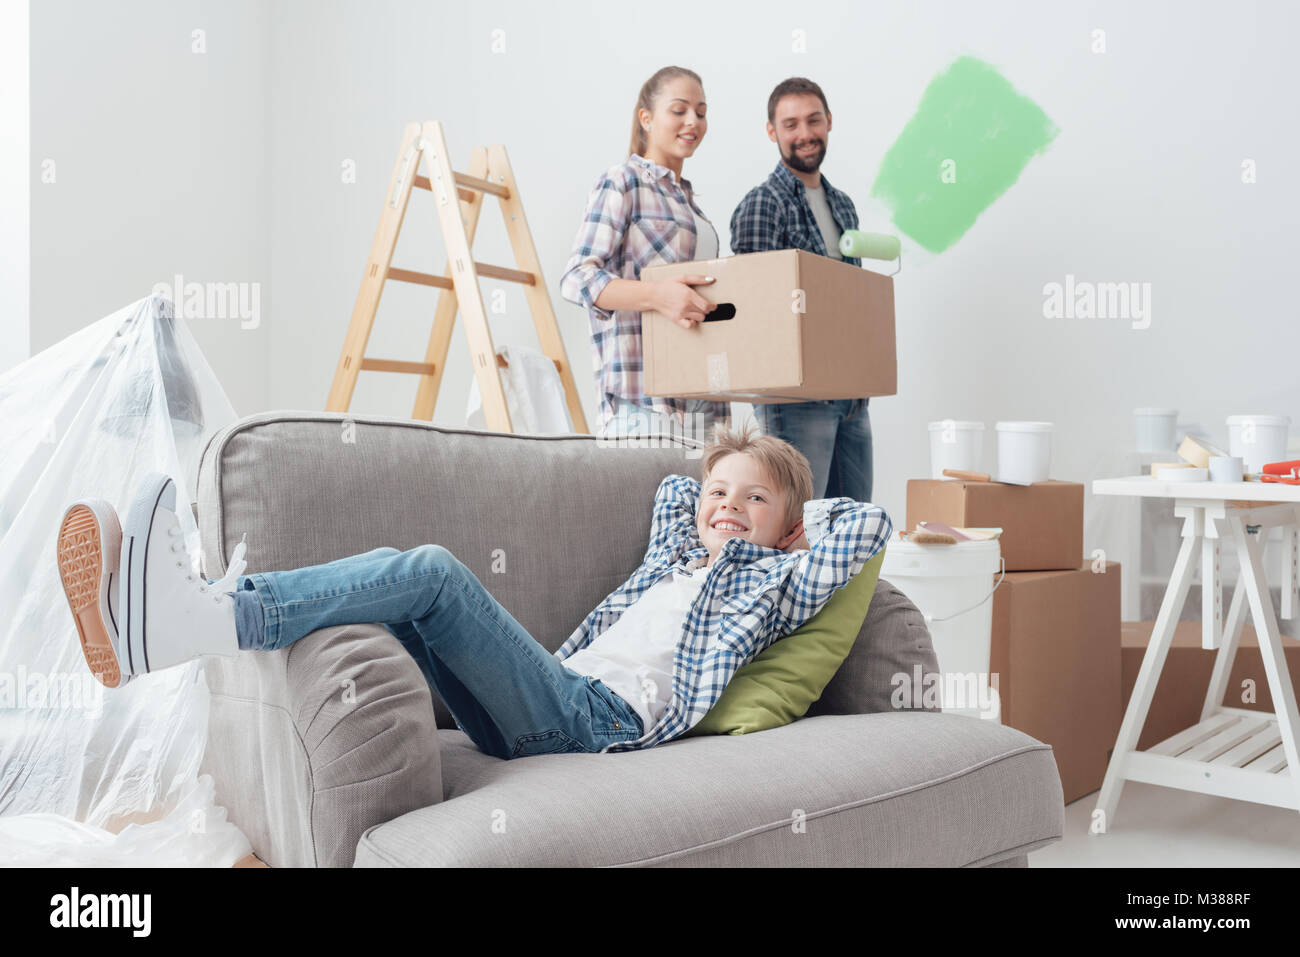 Young family moving into a new house, the mother is carrying a box, the father is painting the room and the child is relaxing on the armchair Stock Photo